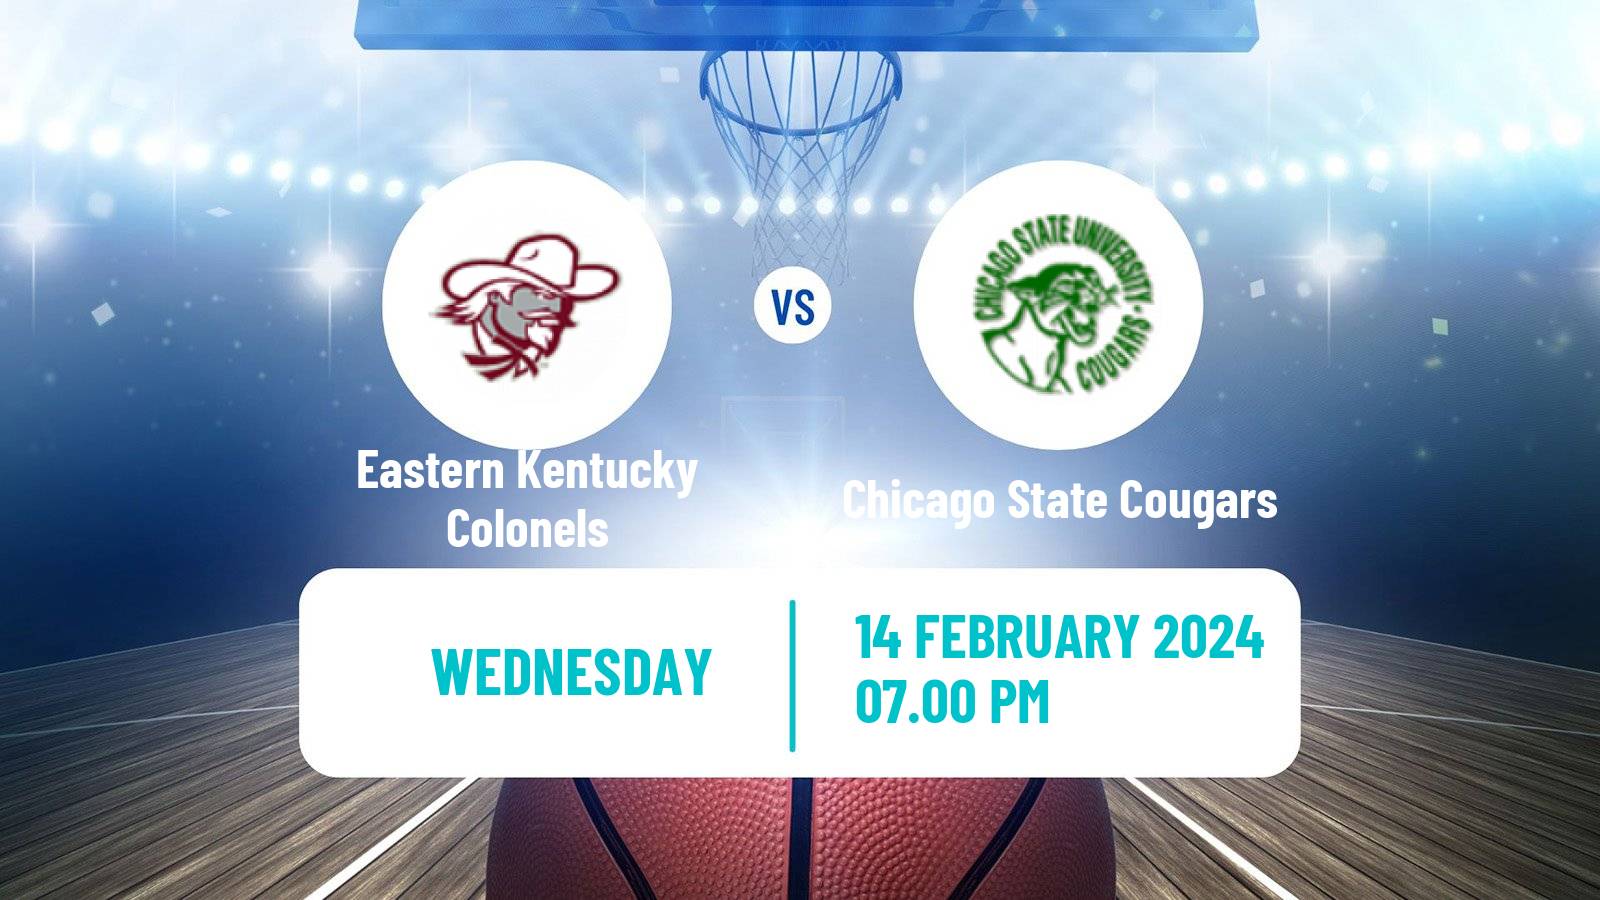 Basketball NCAA College Basketball Eastern Kentucky Colonels - Chicago State Cougars